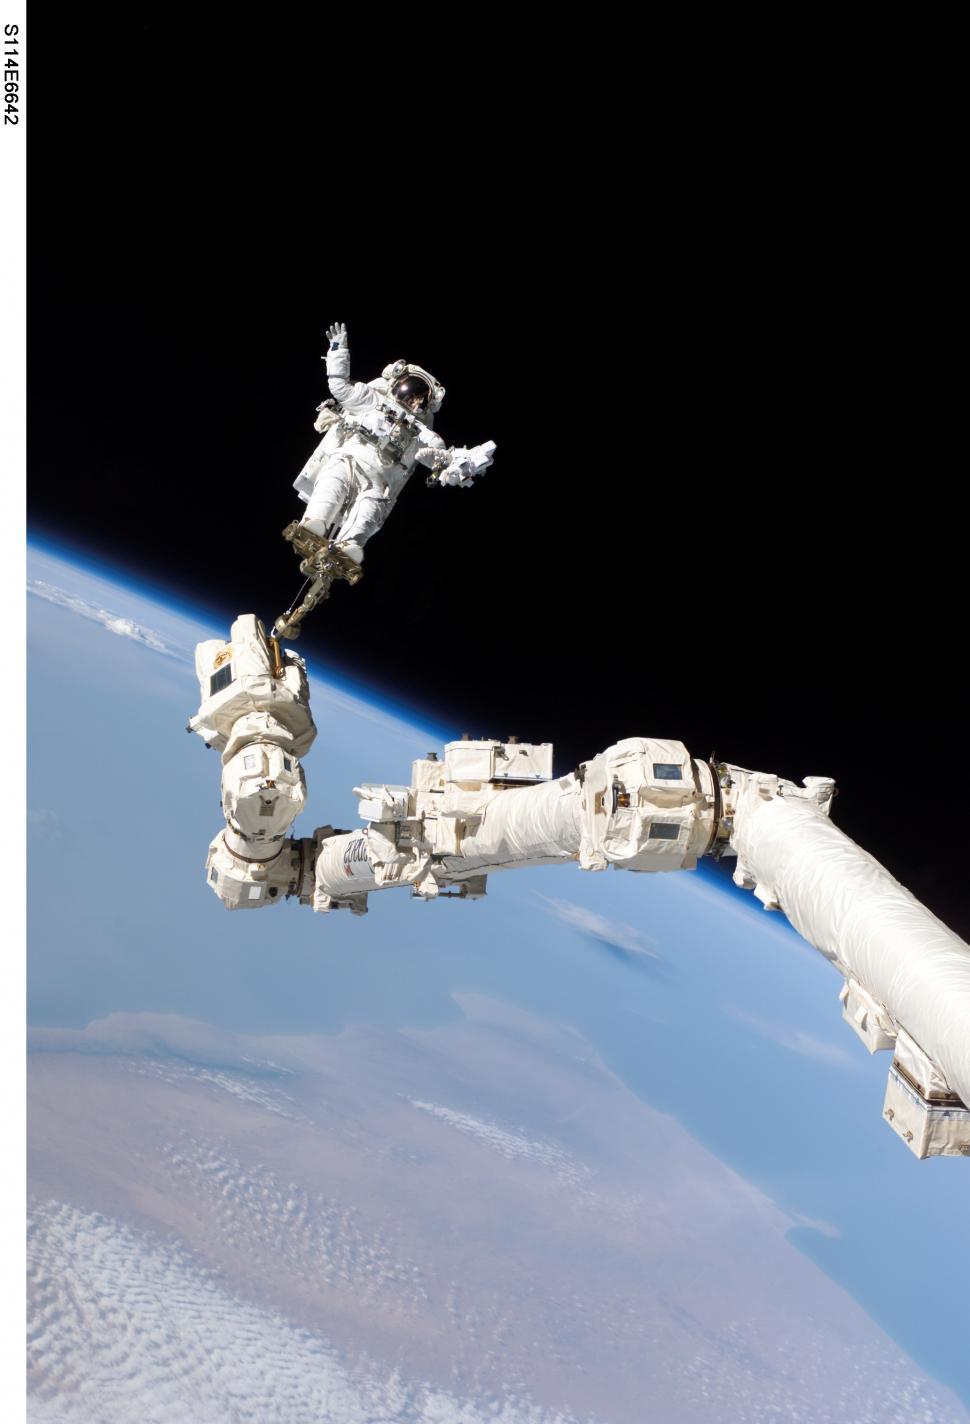 Free Image of Astronaut Floating Next to Space Station 